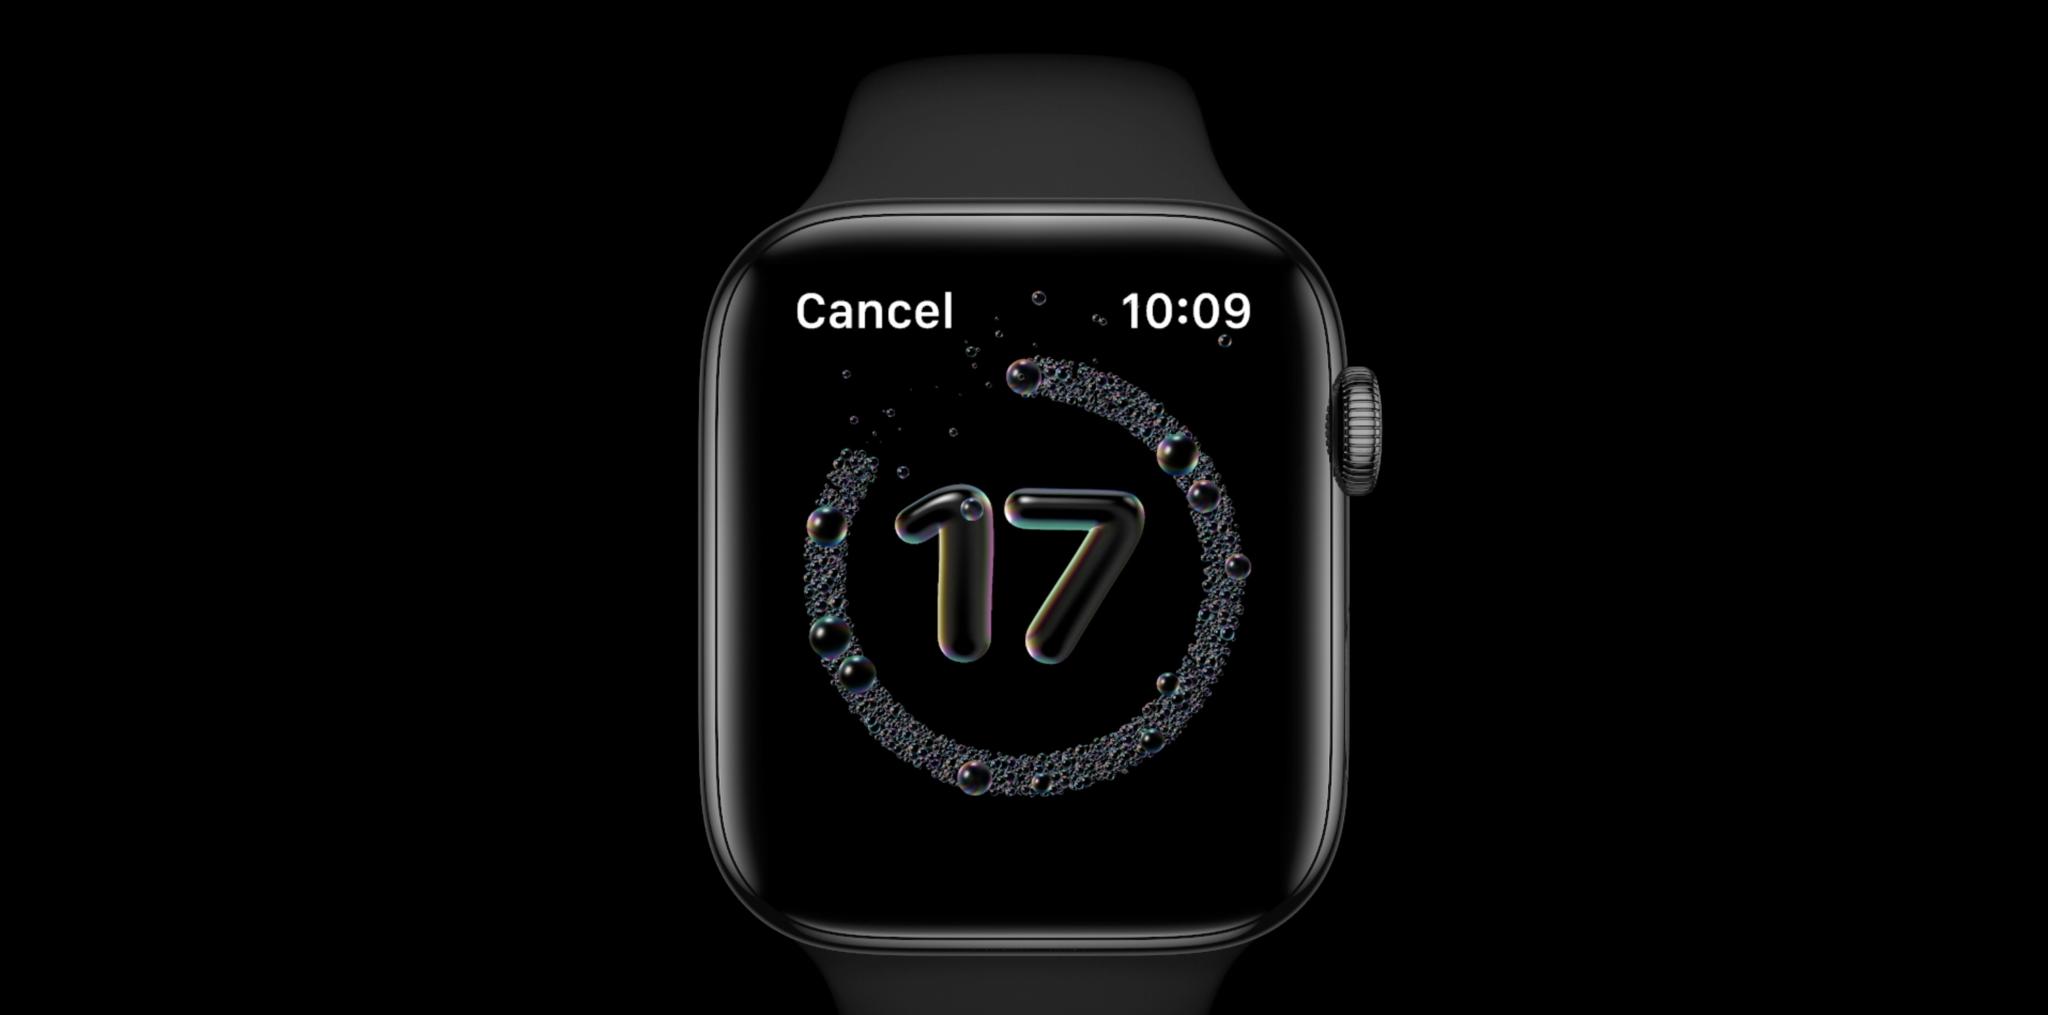 Apple Watch hand washing feature